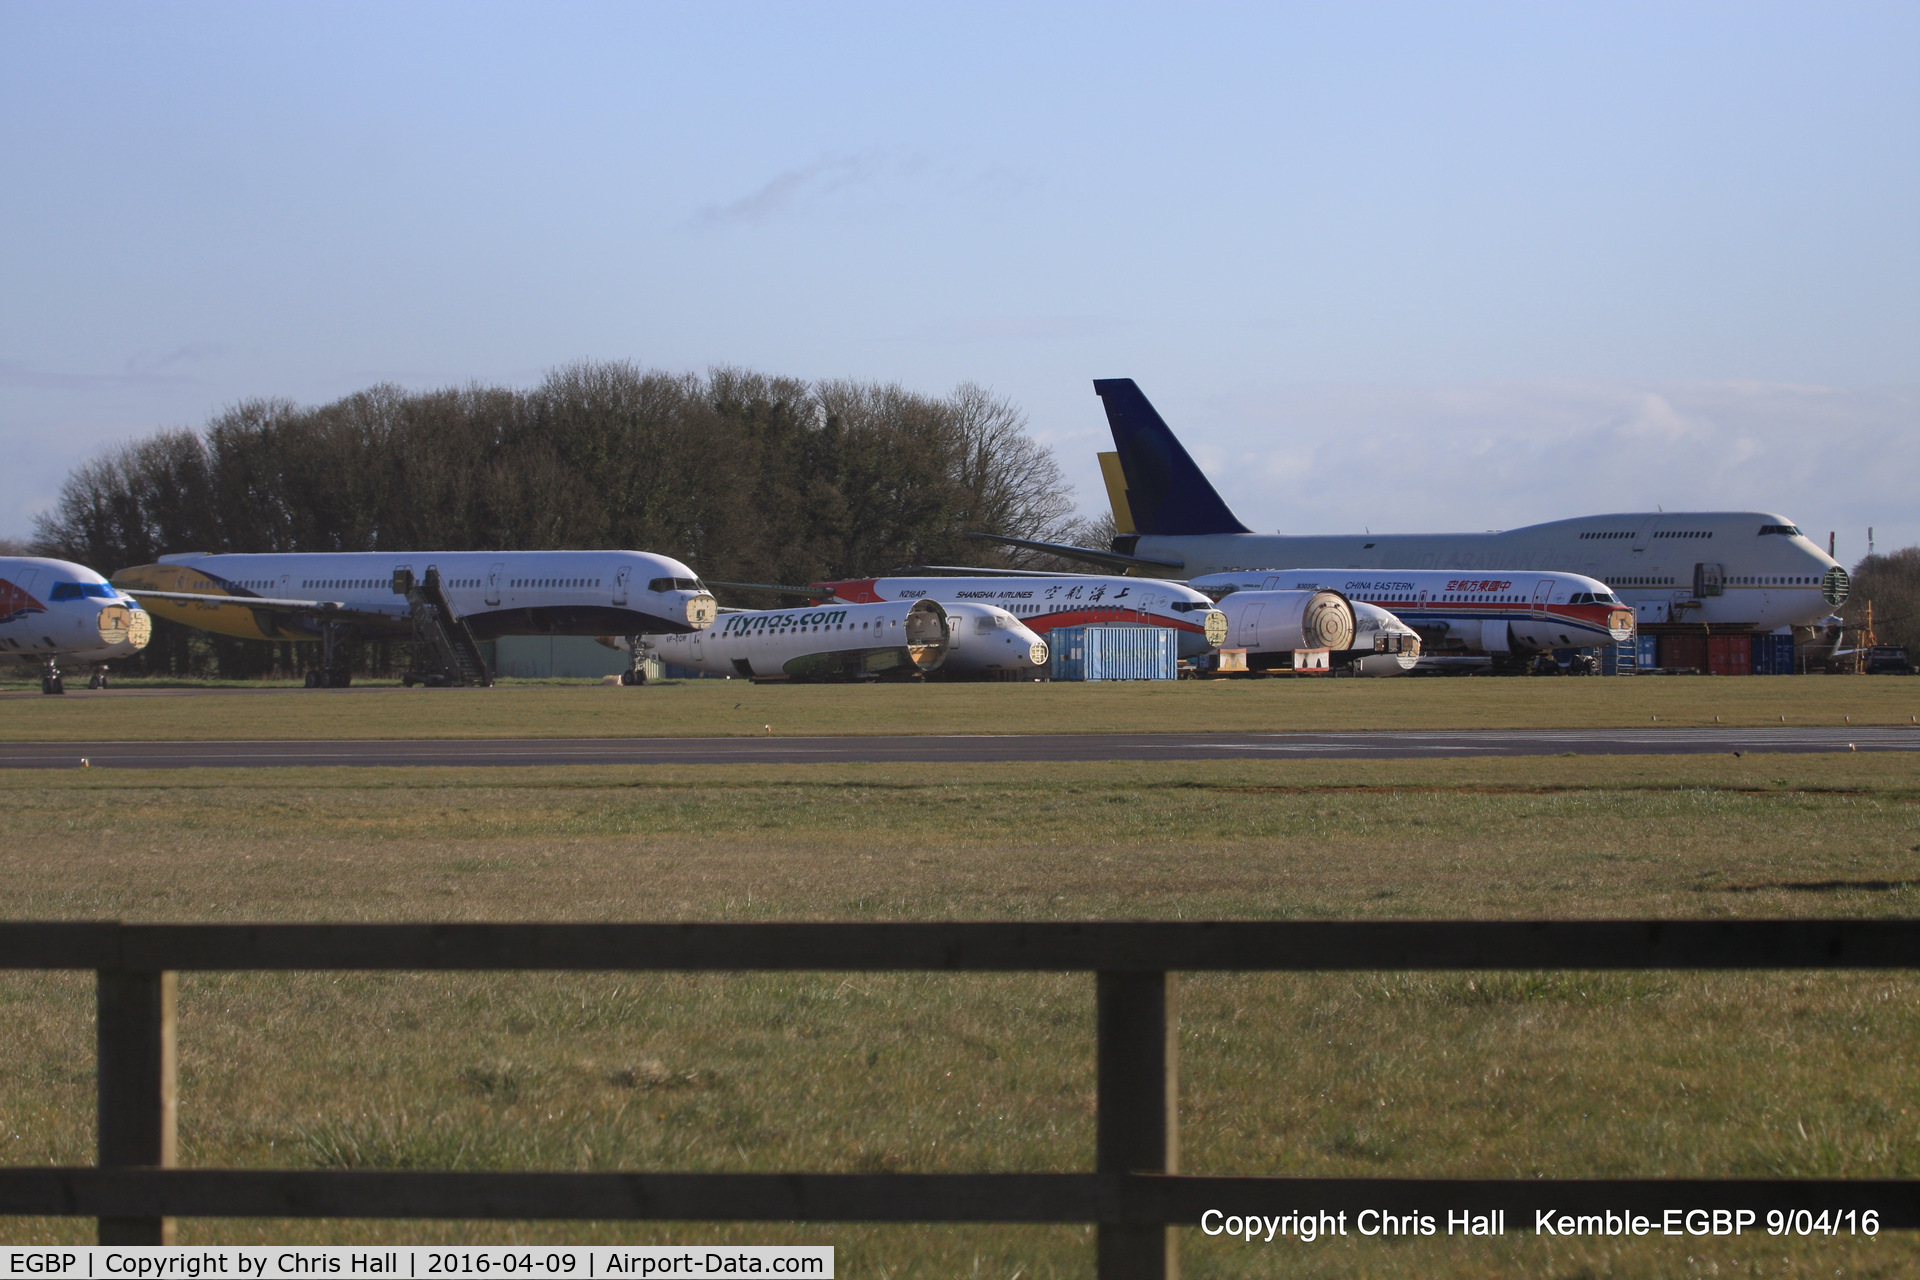 Kemble Airport, Kemble, England United Kingdom (EGBP) - The scrapping area on the Belfast Apron at Kemble